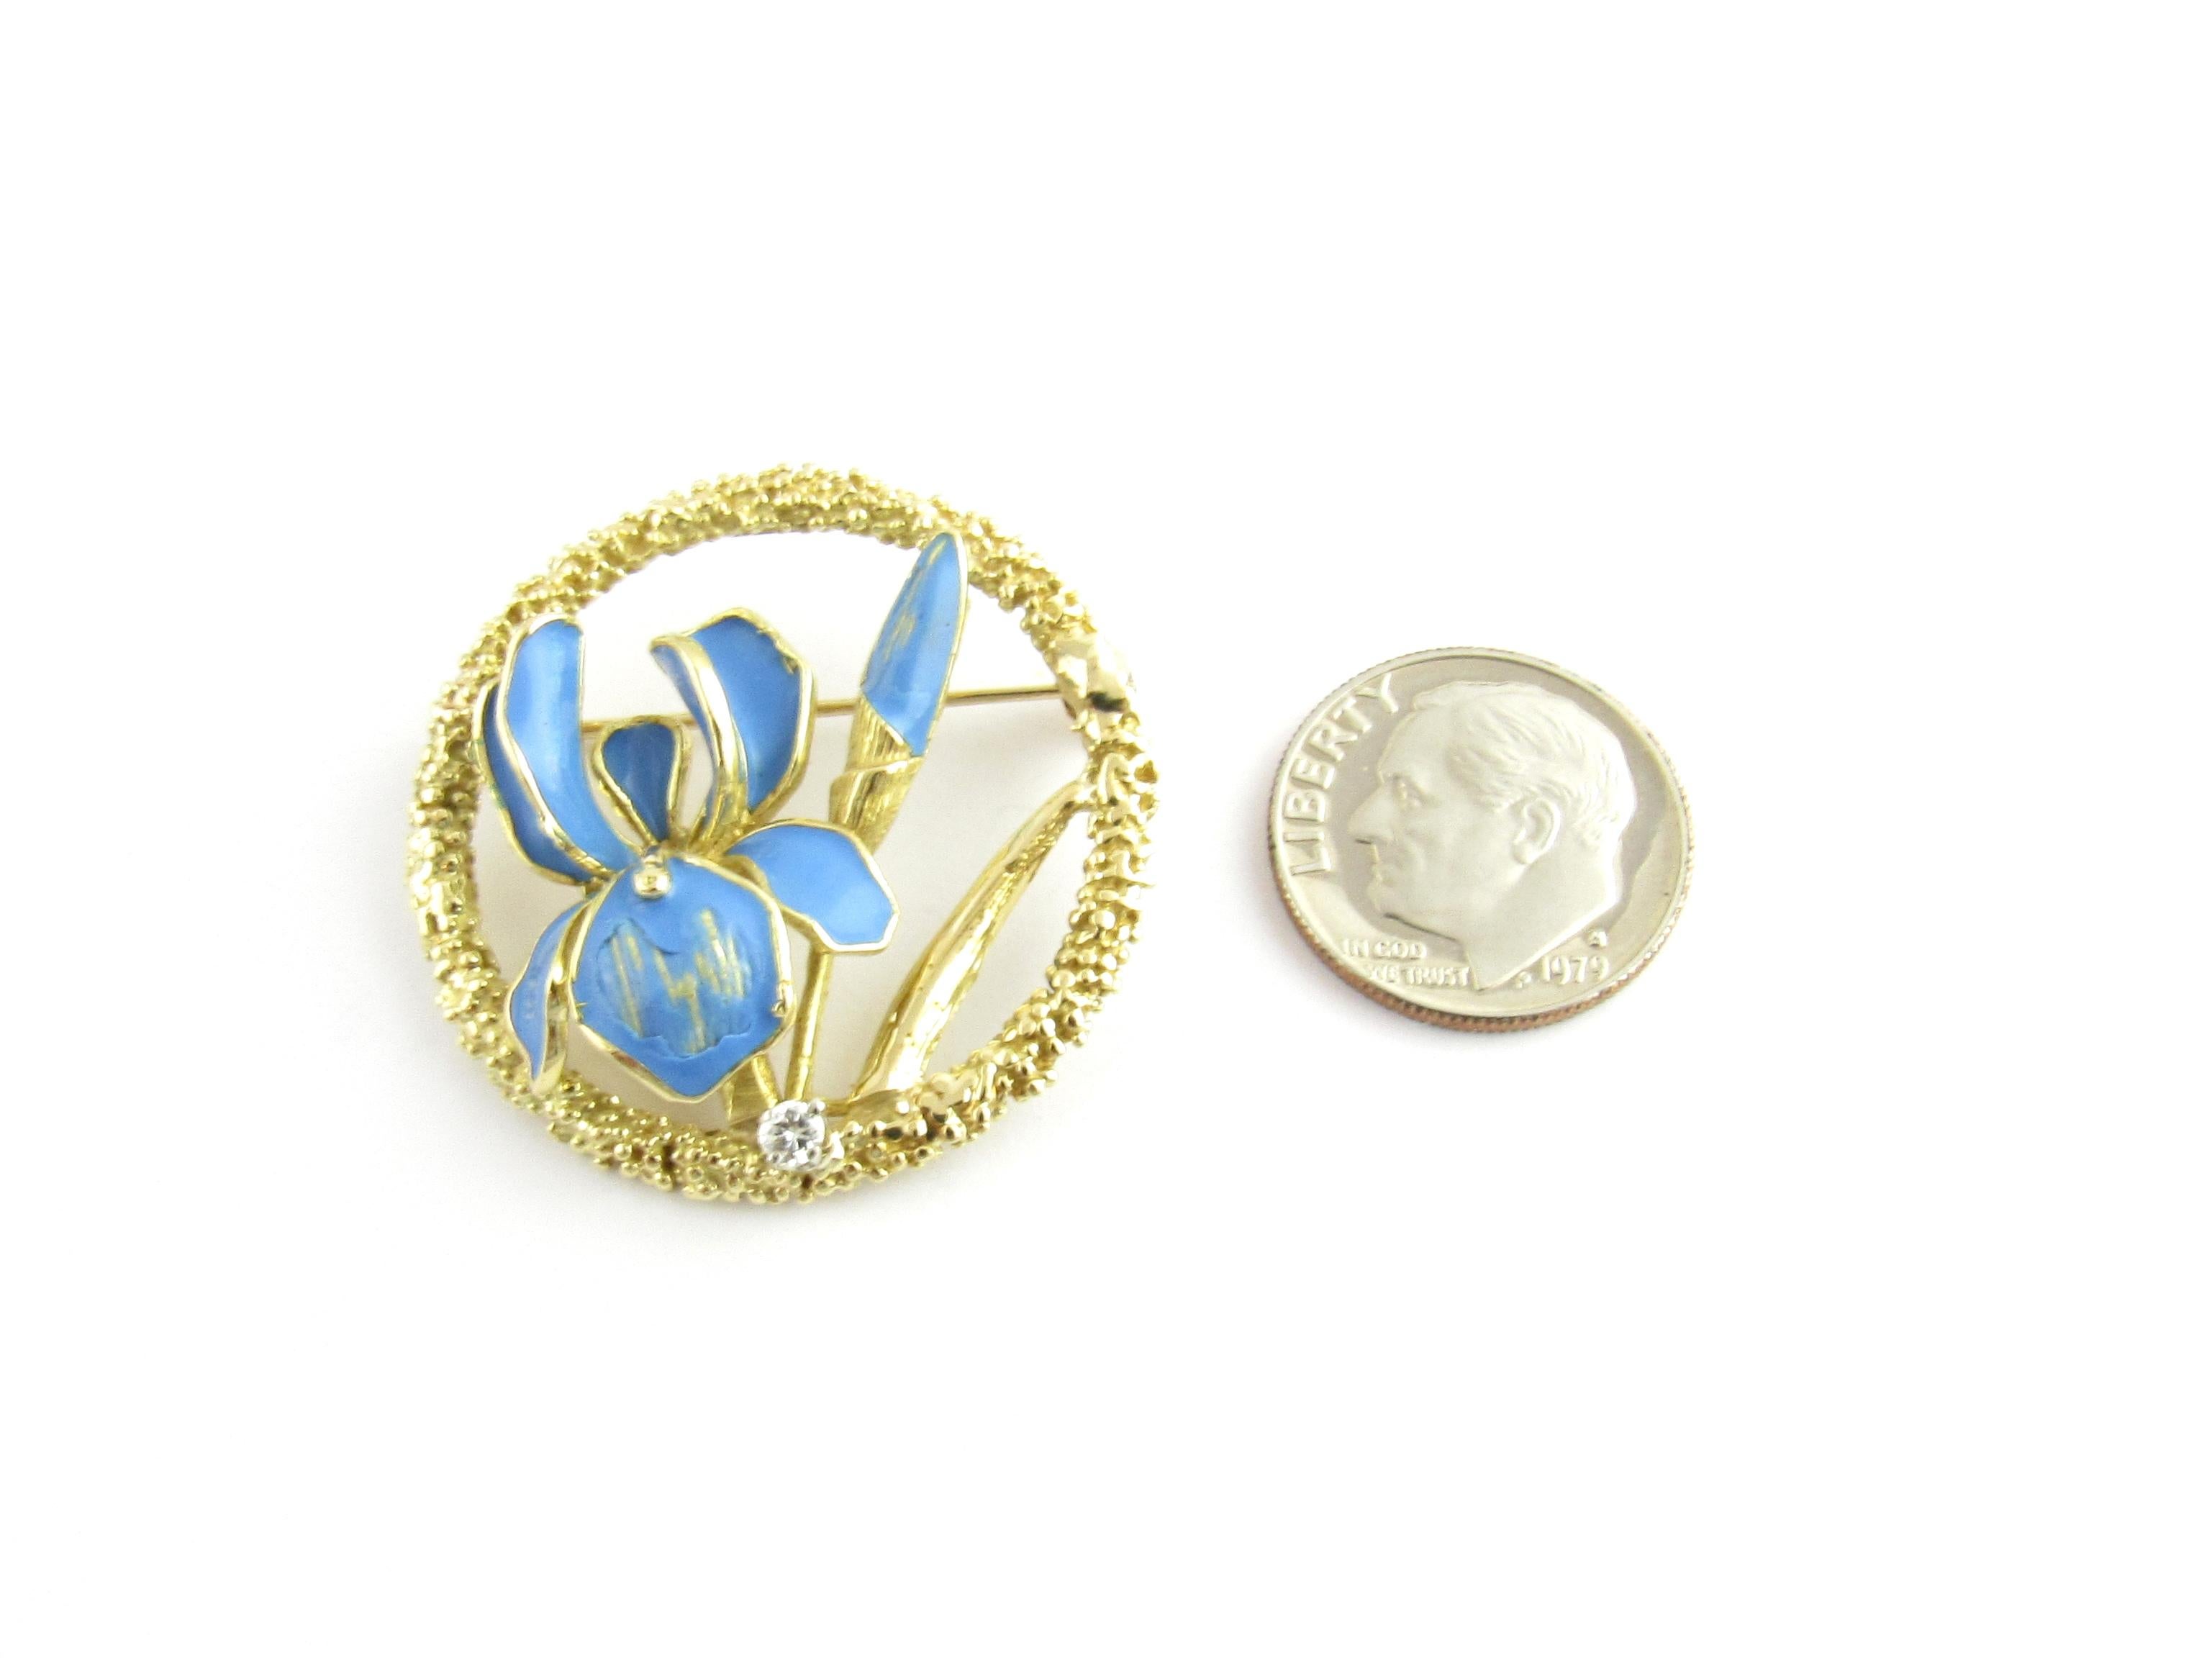 18 Karat Yellow Gold and Blue Enamel Floral Brooch or Pin 3